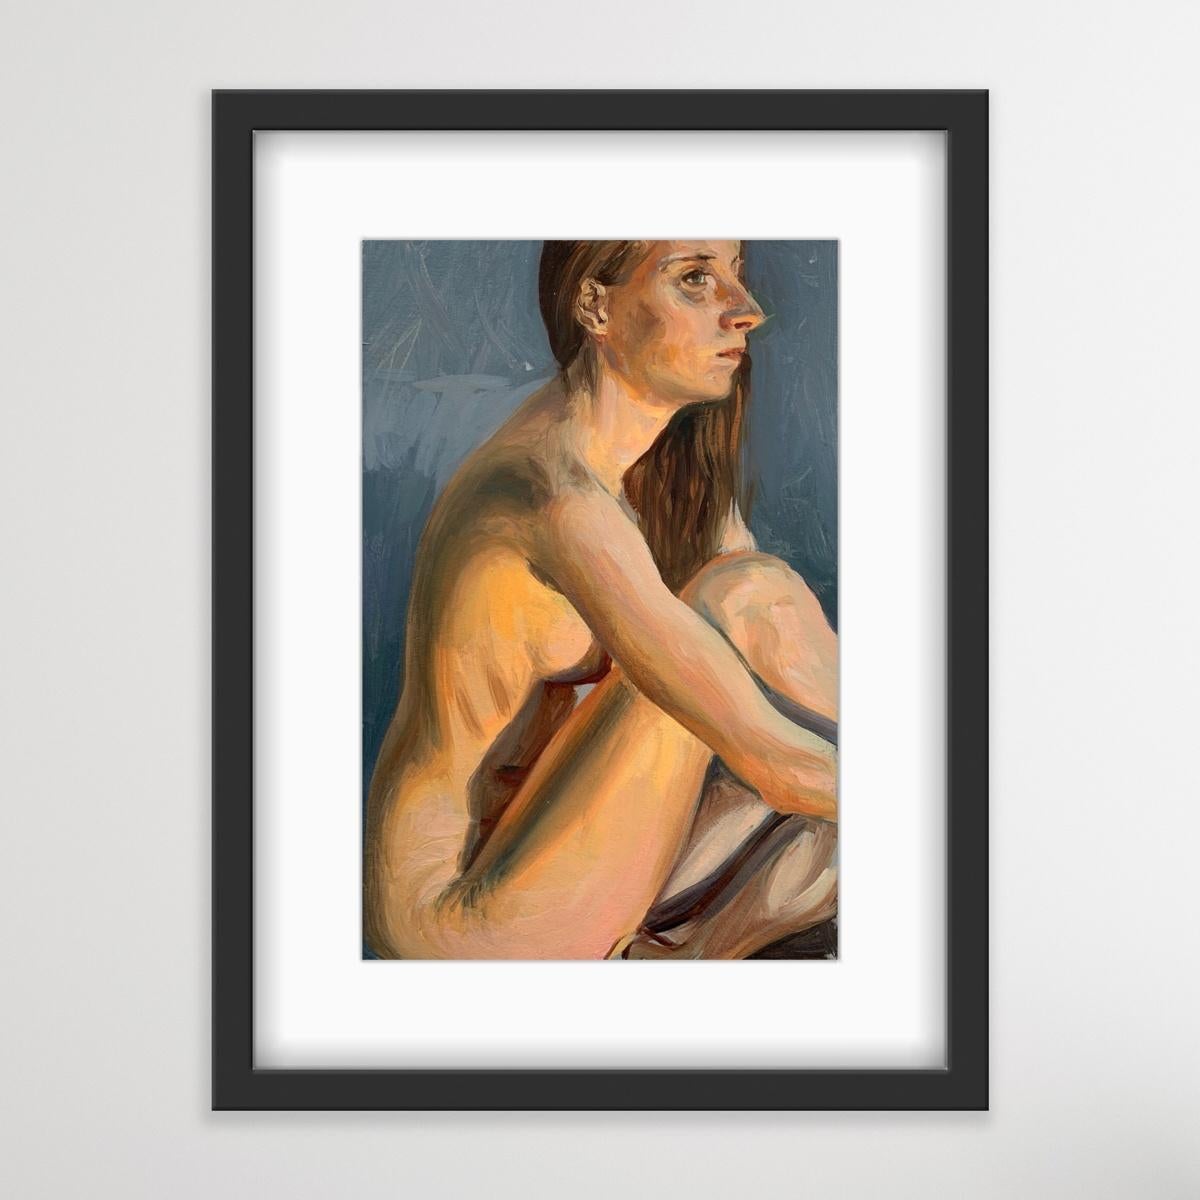 A  nude - Realistic oil painting, Warm tones, Young Polish artist - Naturalistic Painting by Agnieszka Staak-Janczarska